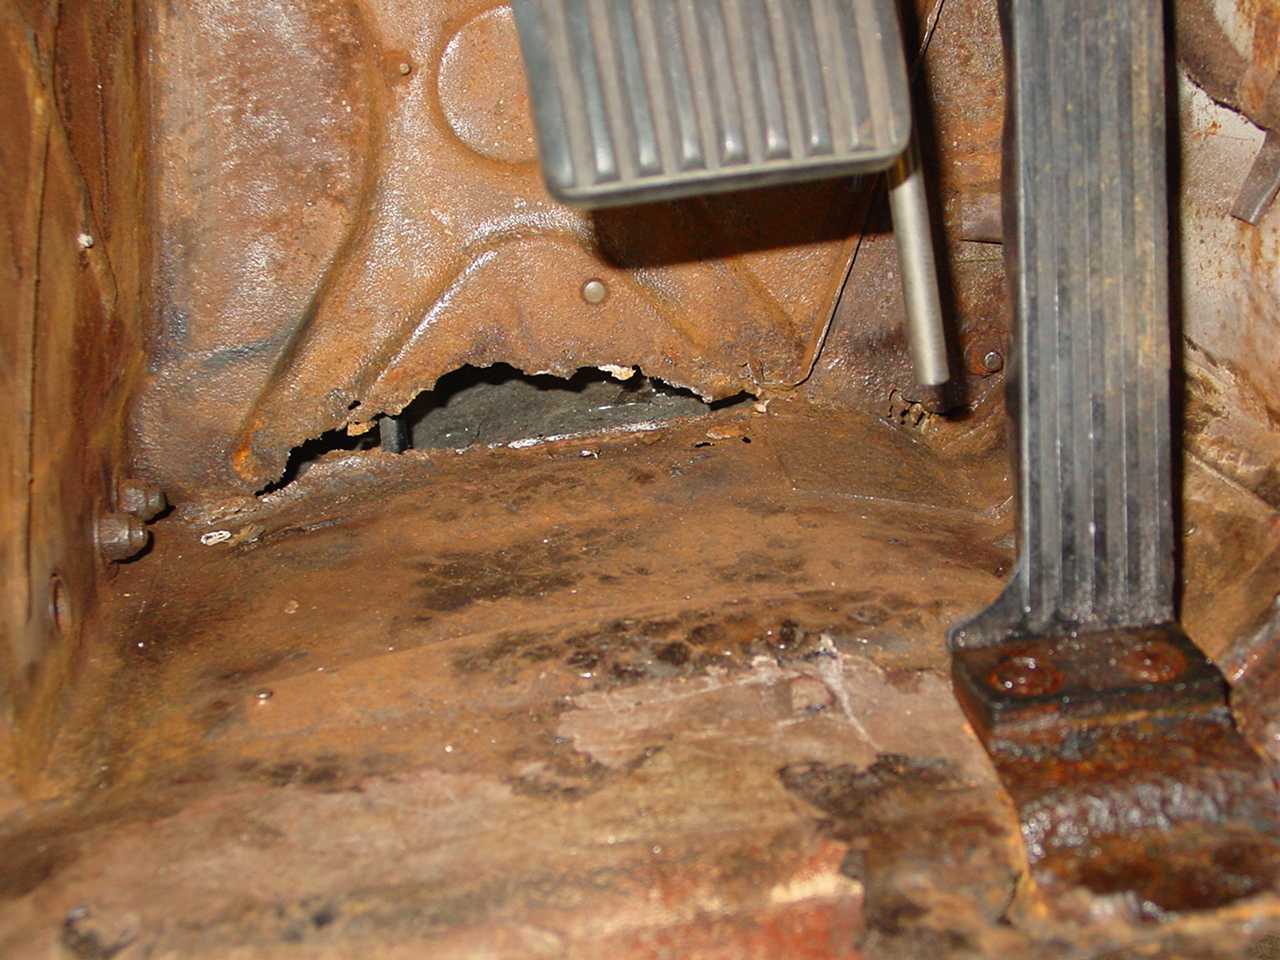 This rust hole was covered by a "flexible white bog" when car was purchased. Buyer beware indeed!